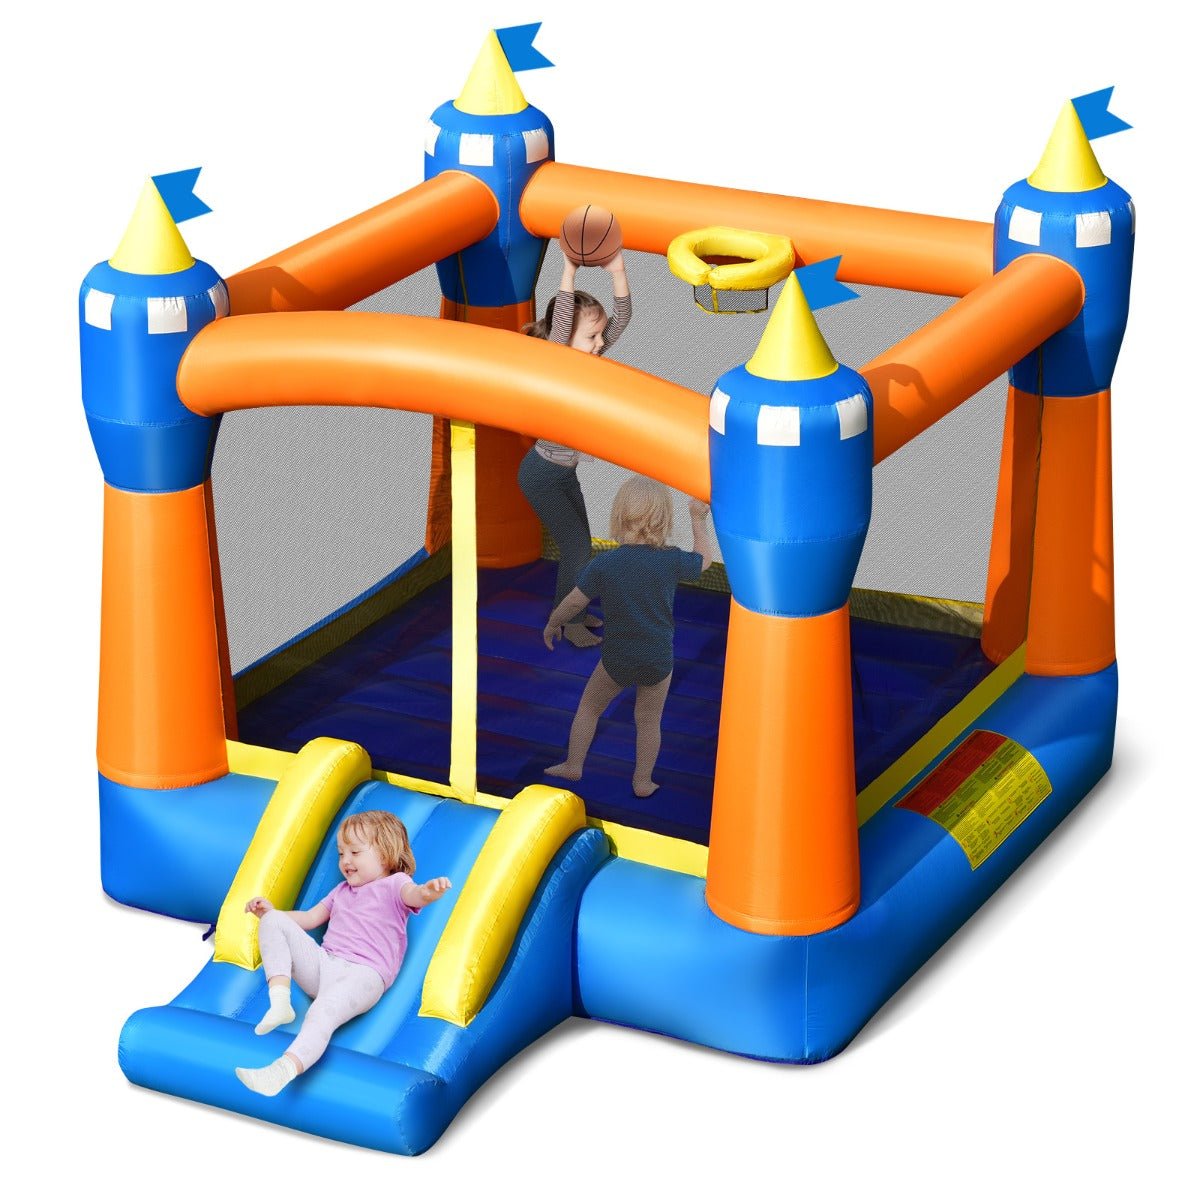 Inflatable Play Structure - Slide, Basketball Hoop & Jumping Zone (No Air Blower)